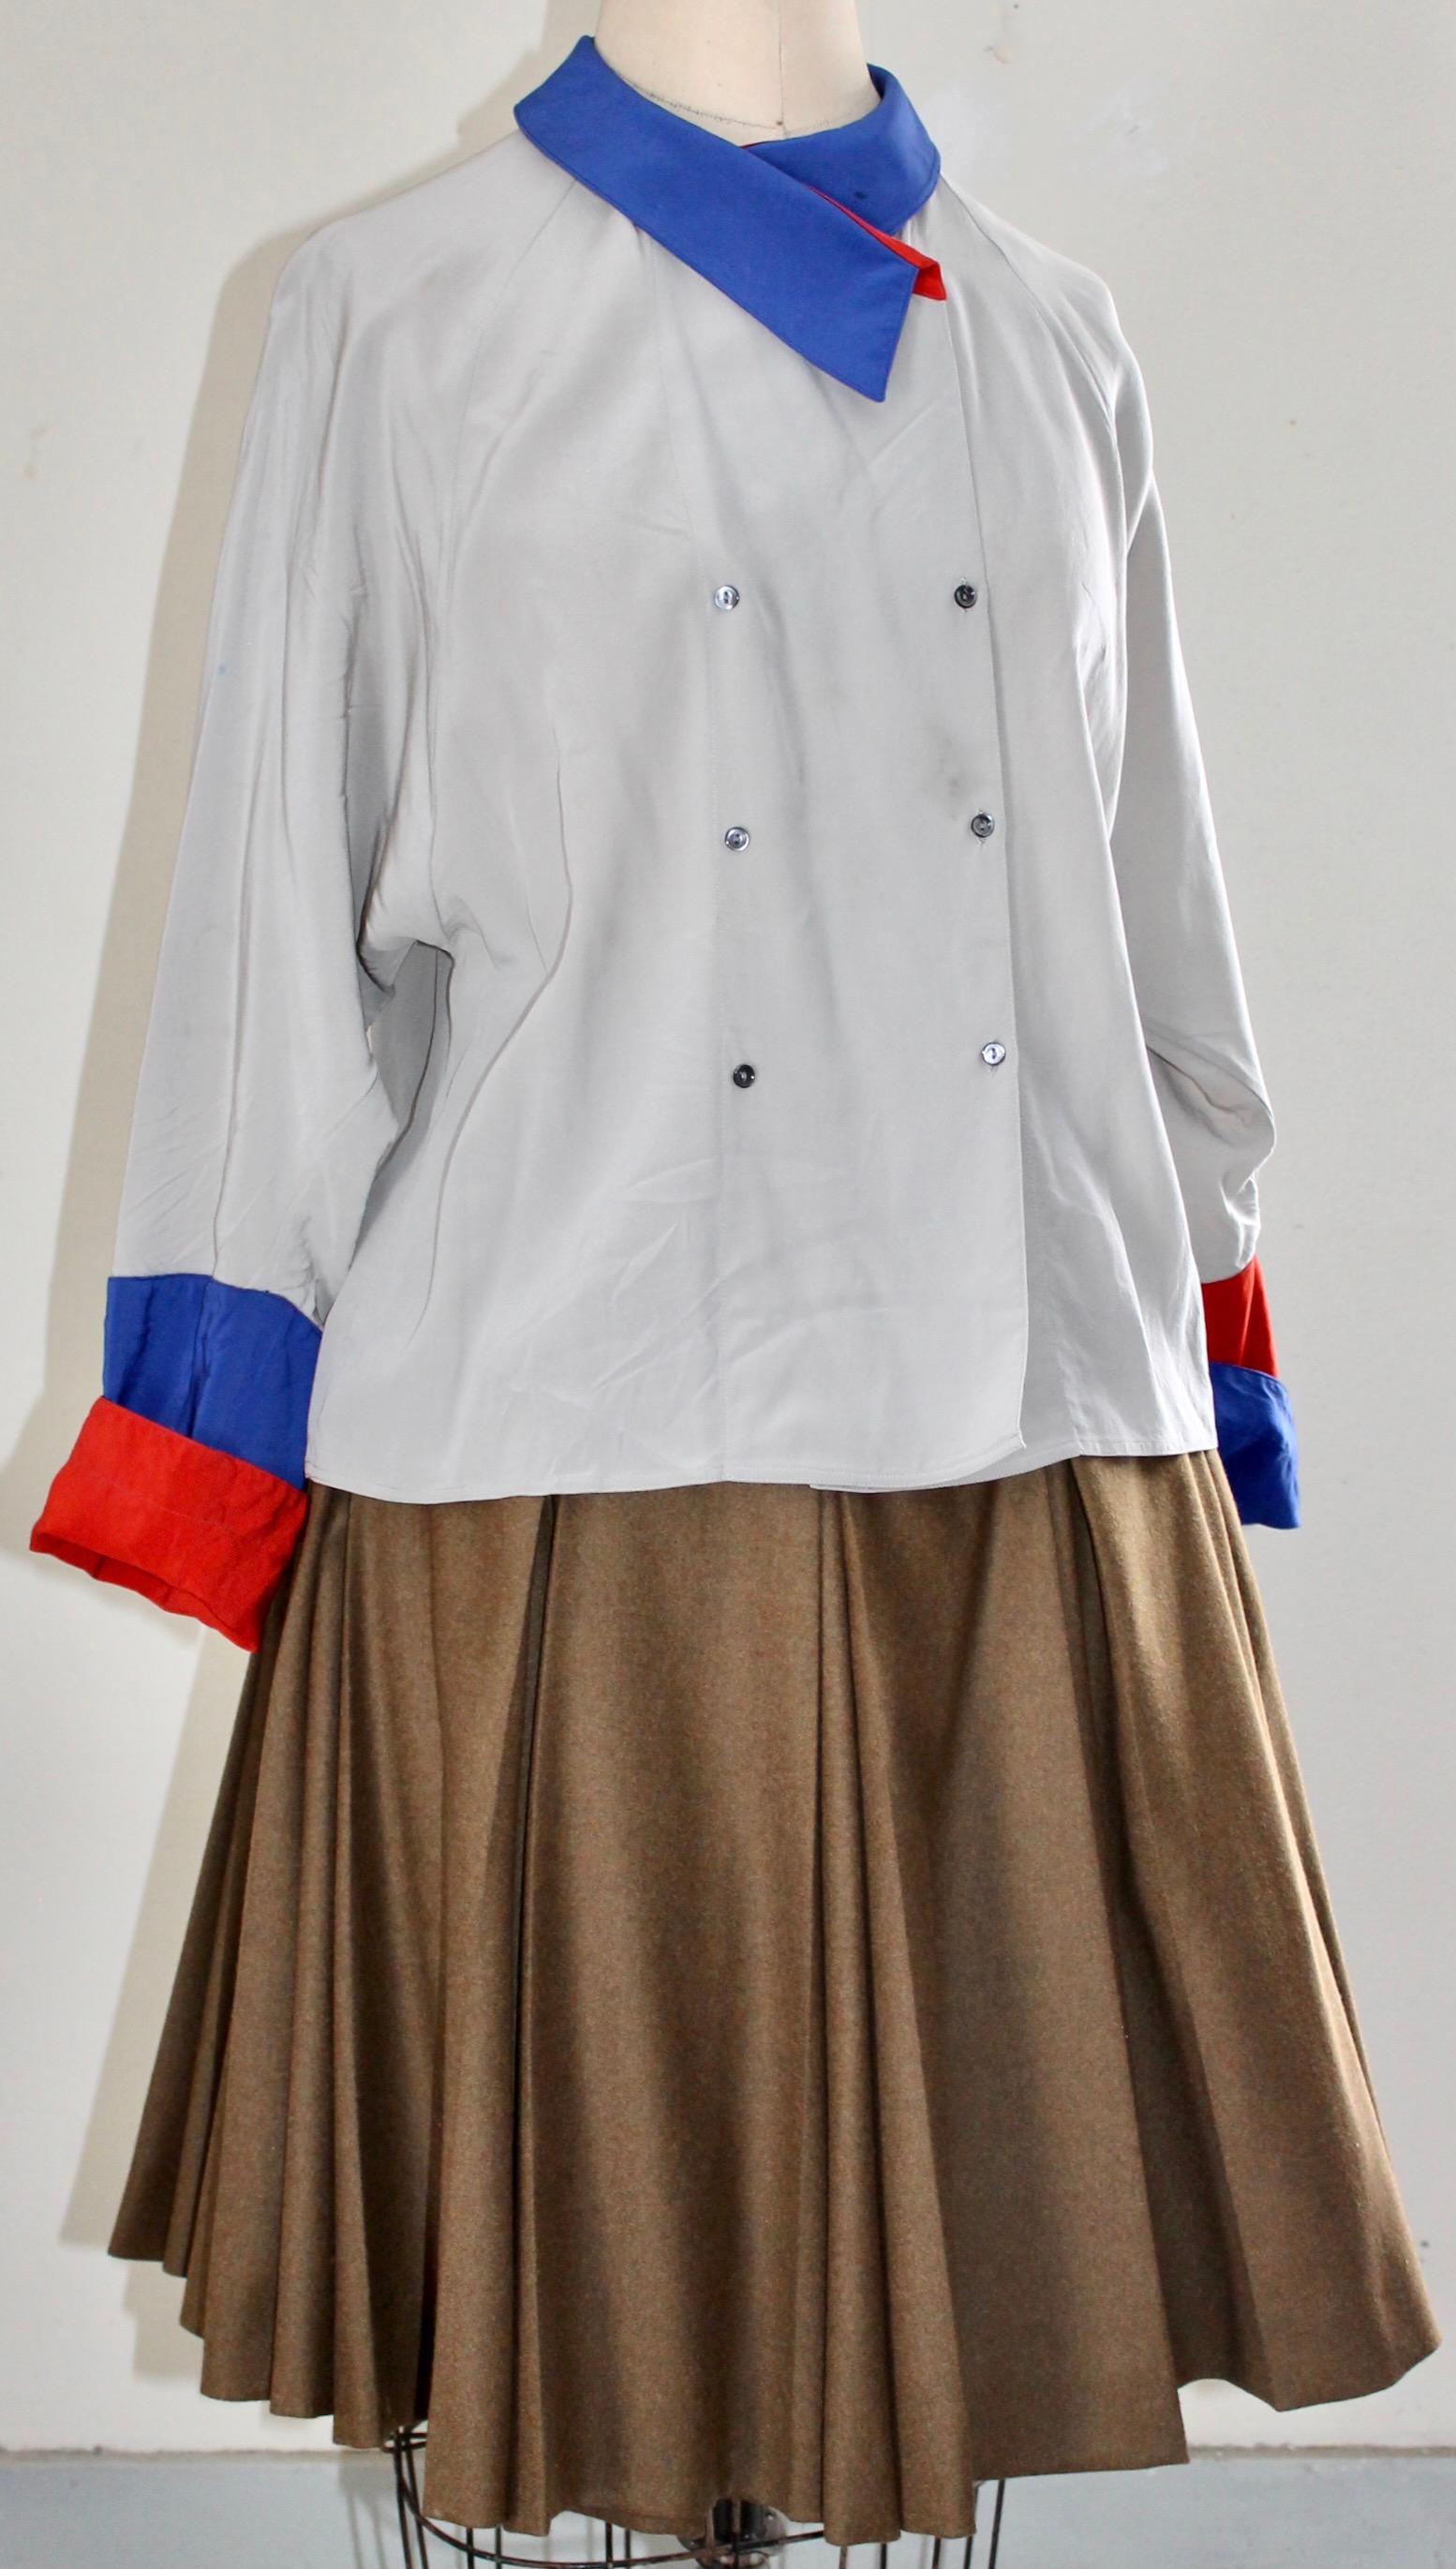 Red, blue and grey Russian Suprematist inspired
Military top. 